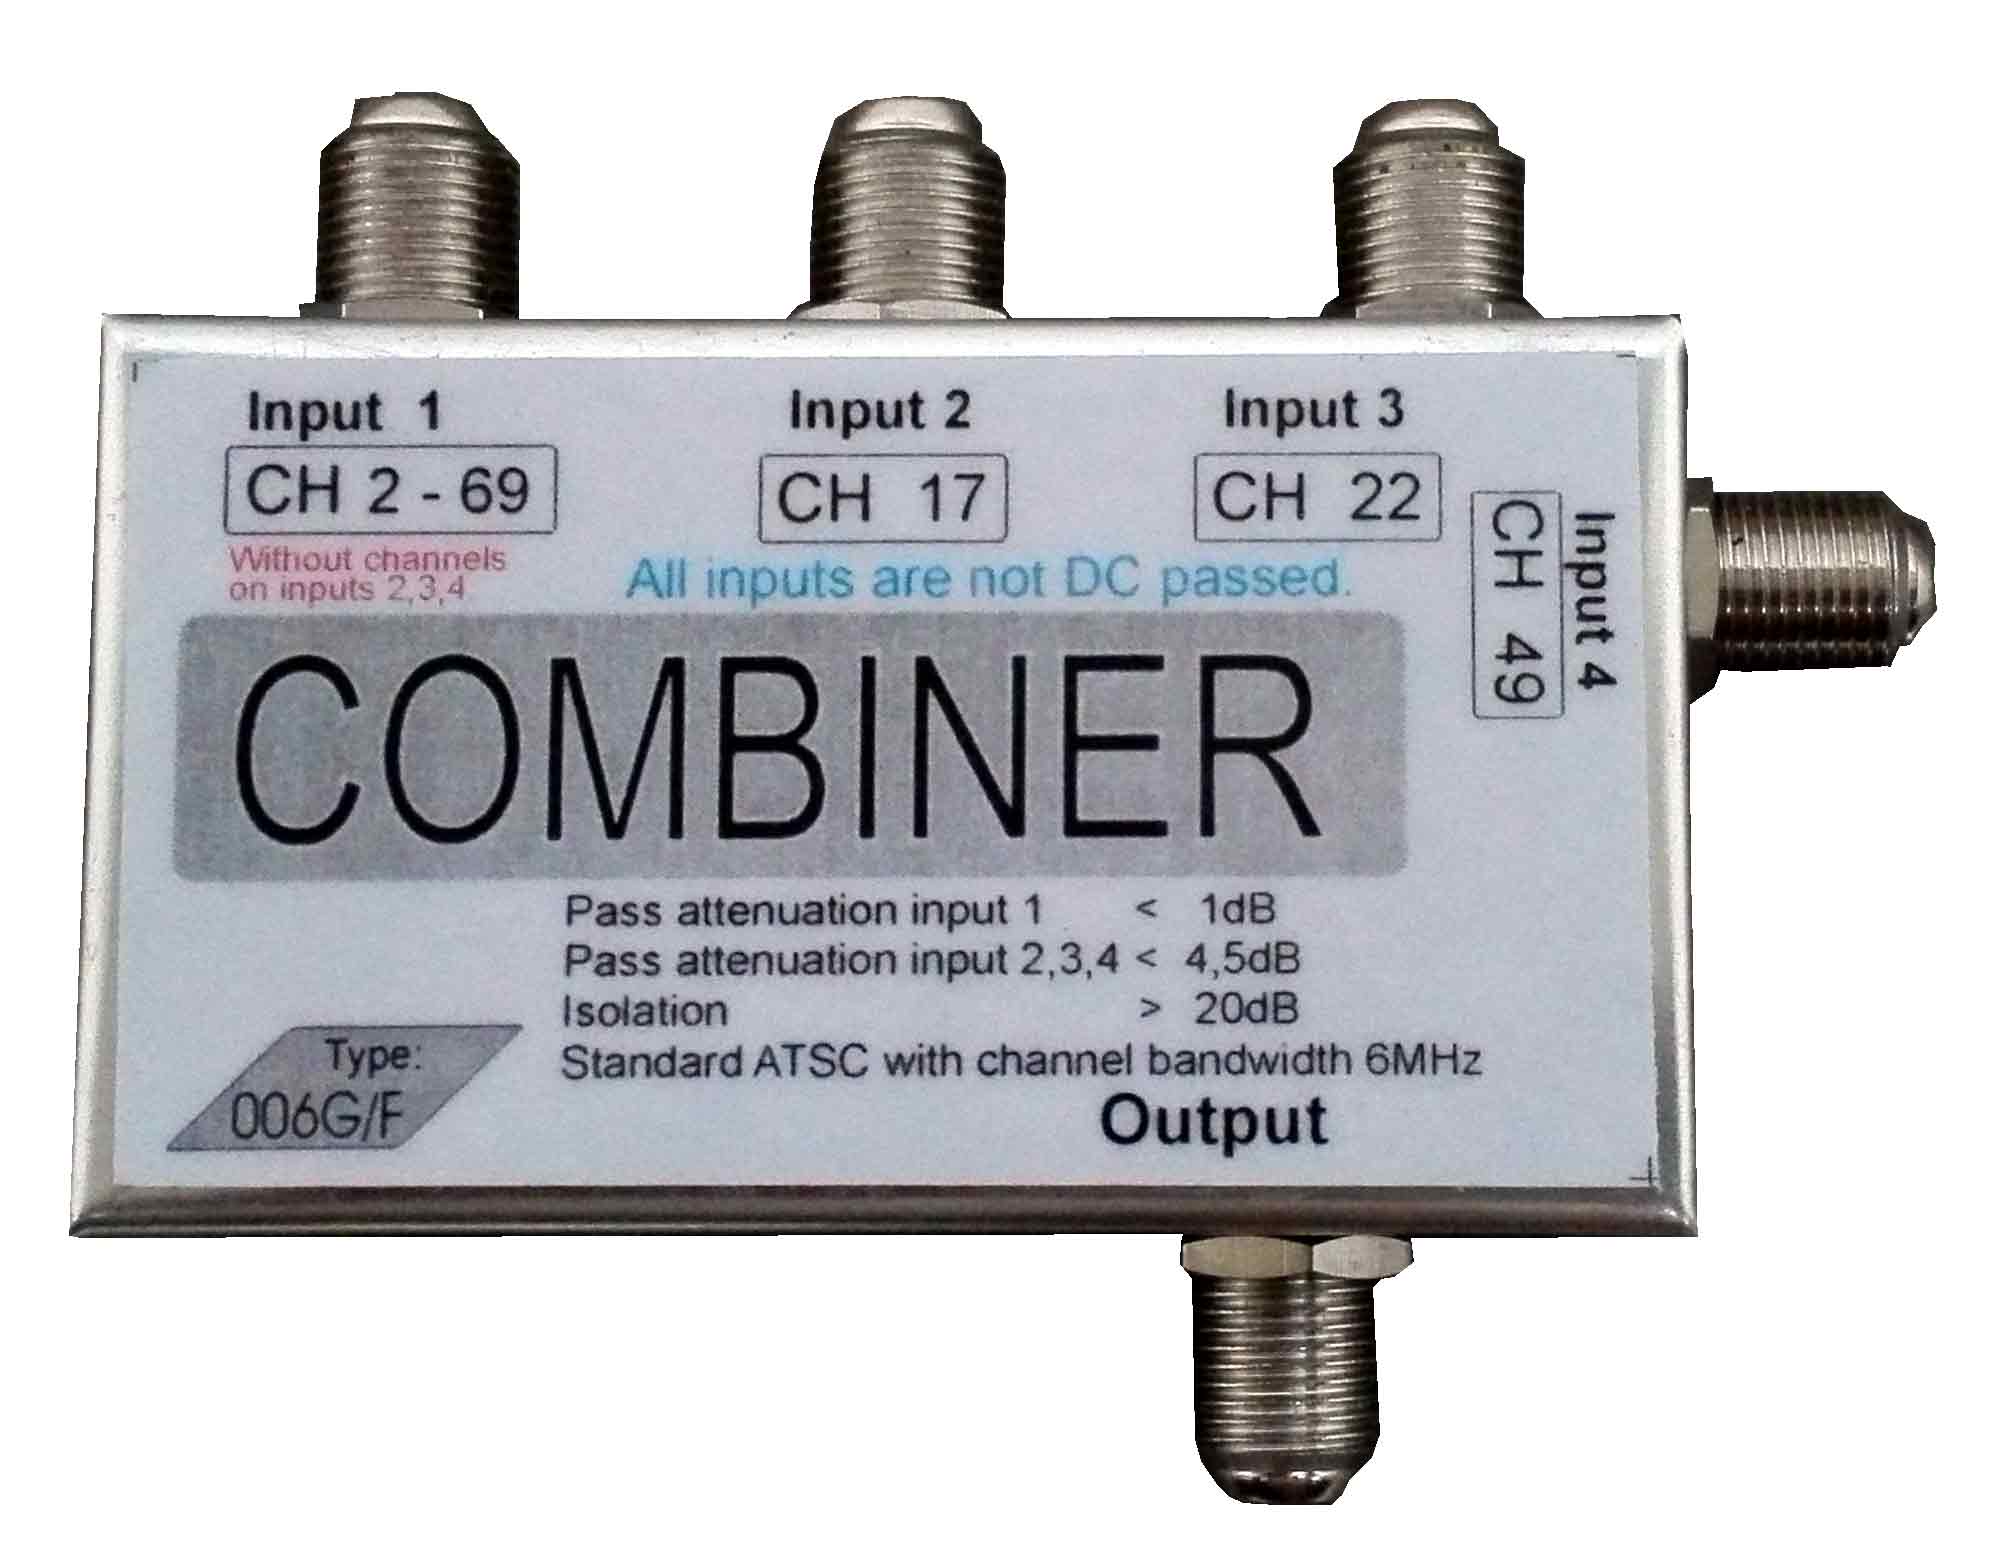 selective_combiner_UHF